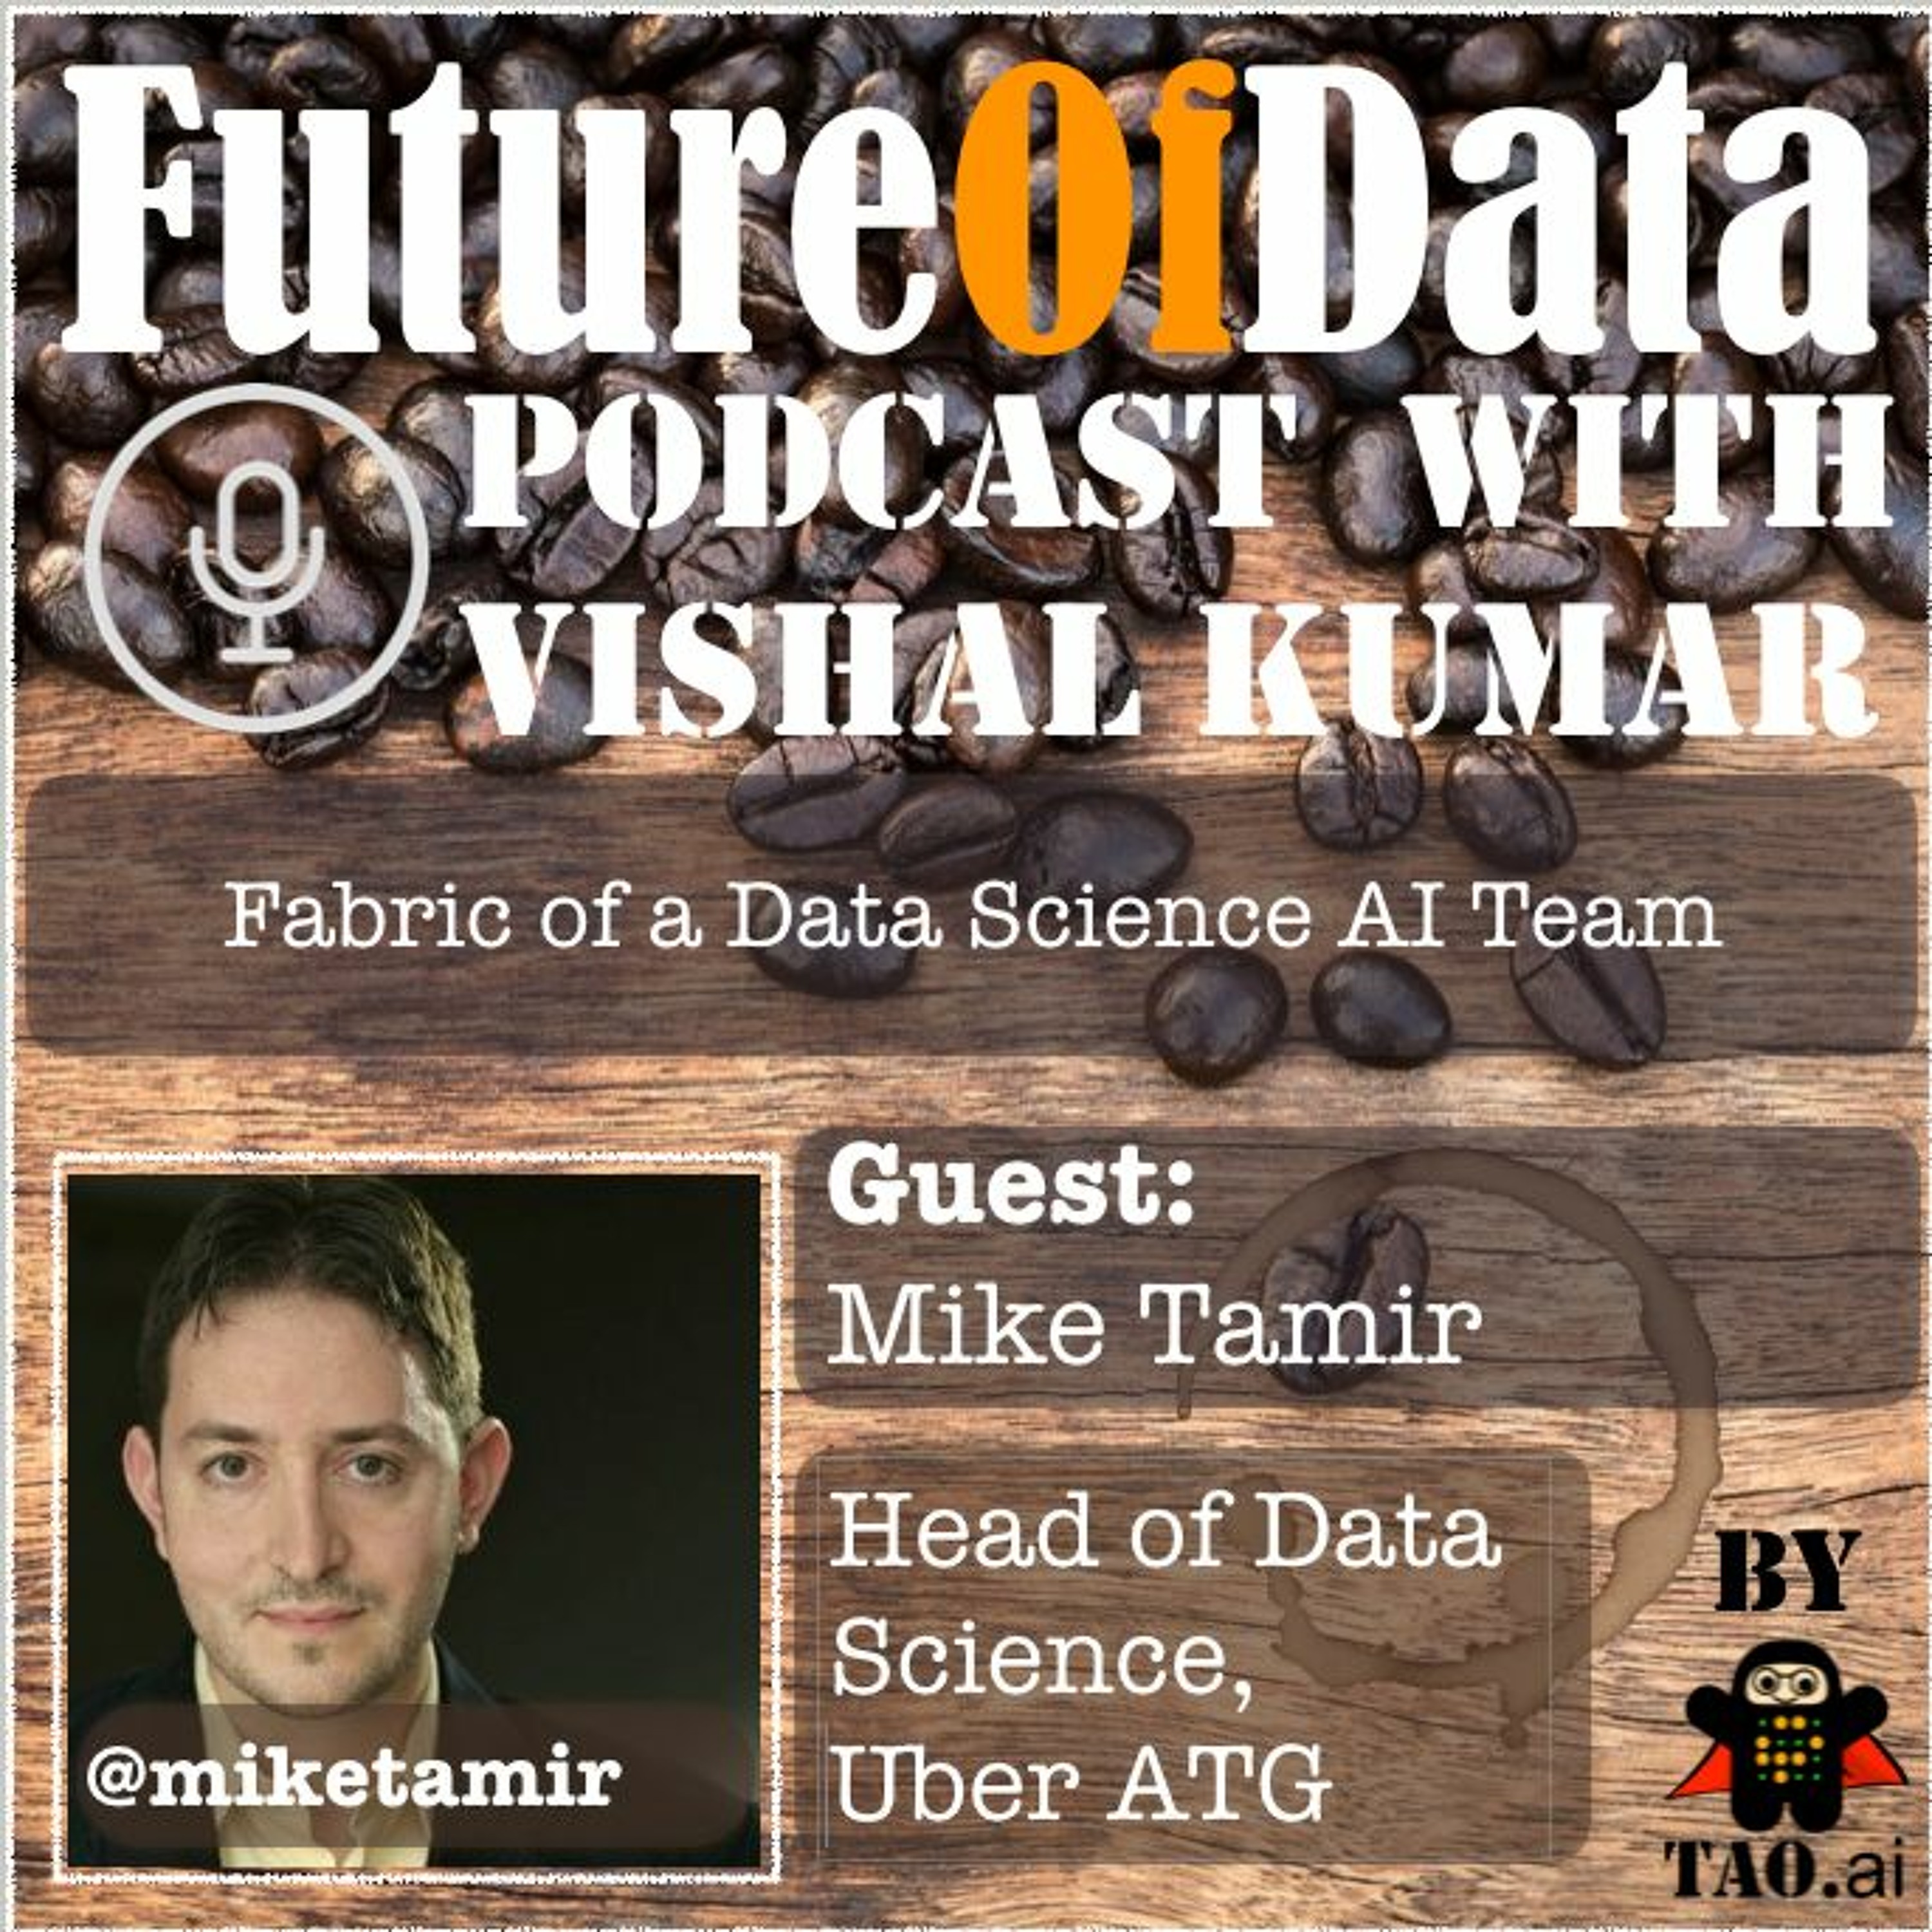 Mike Tamir talks about building Data Science AI Teams